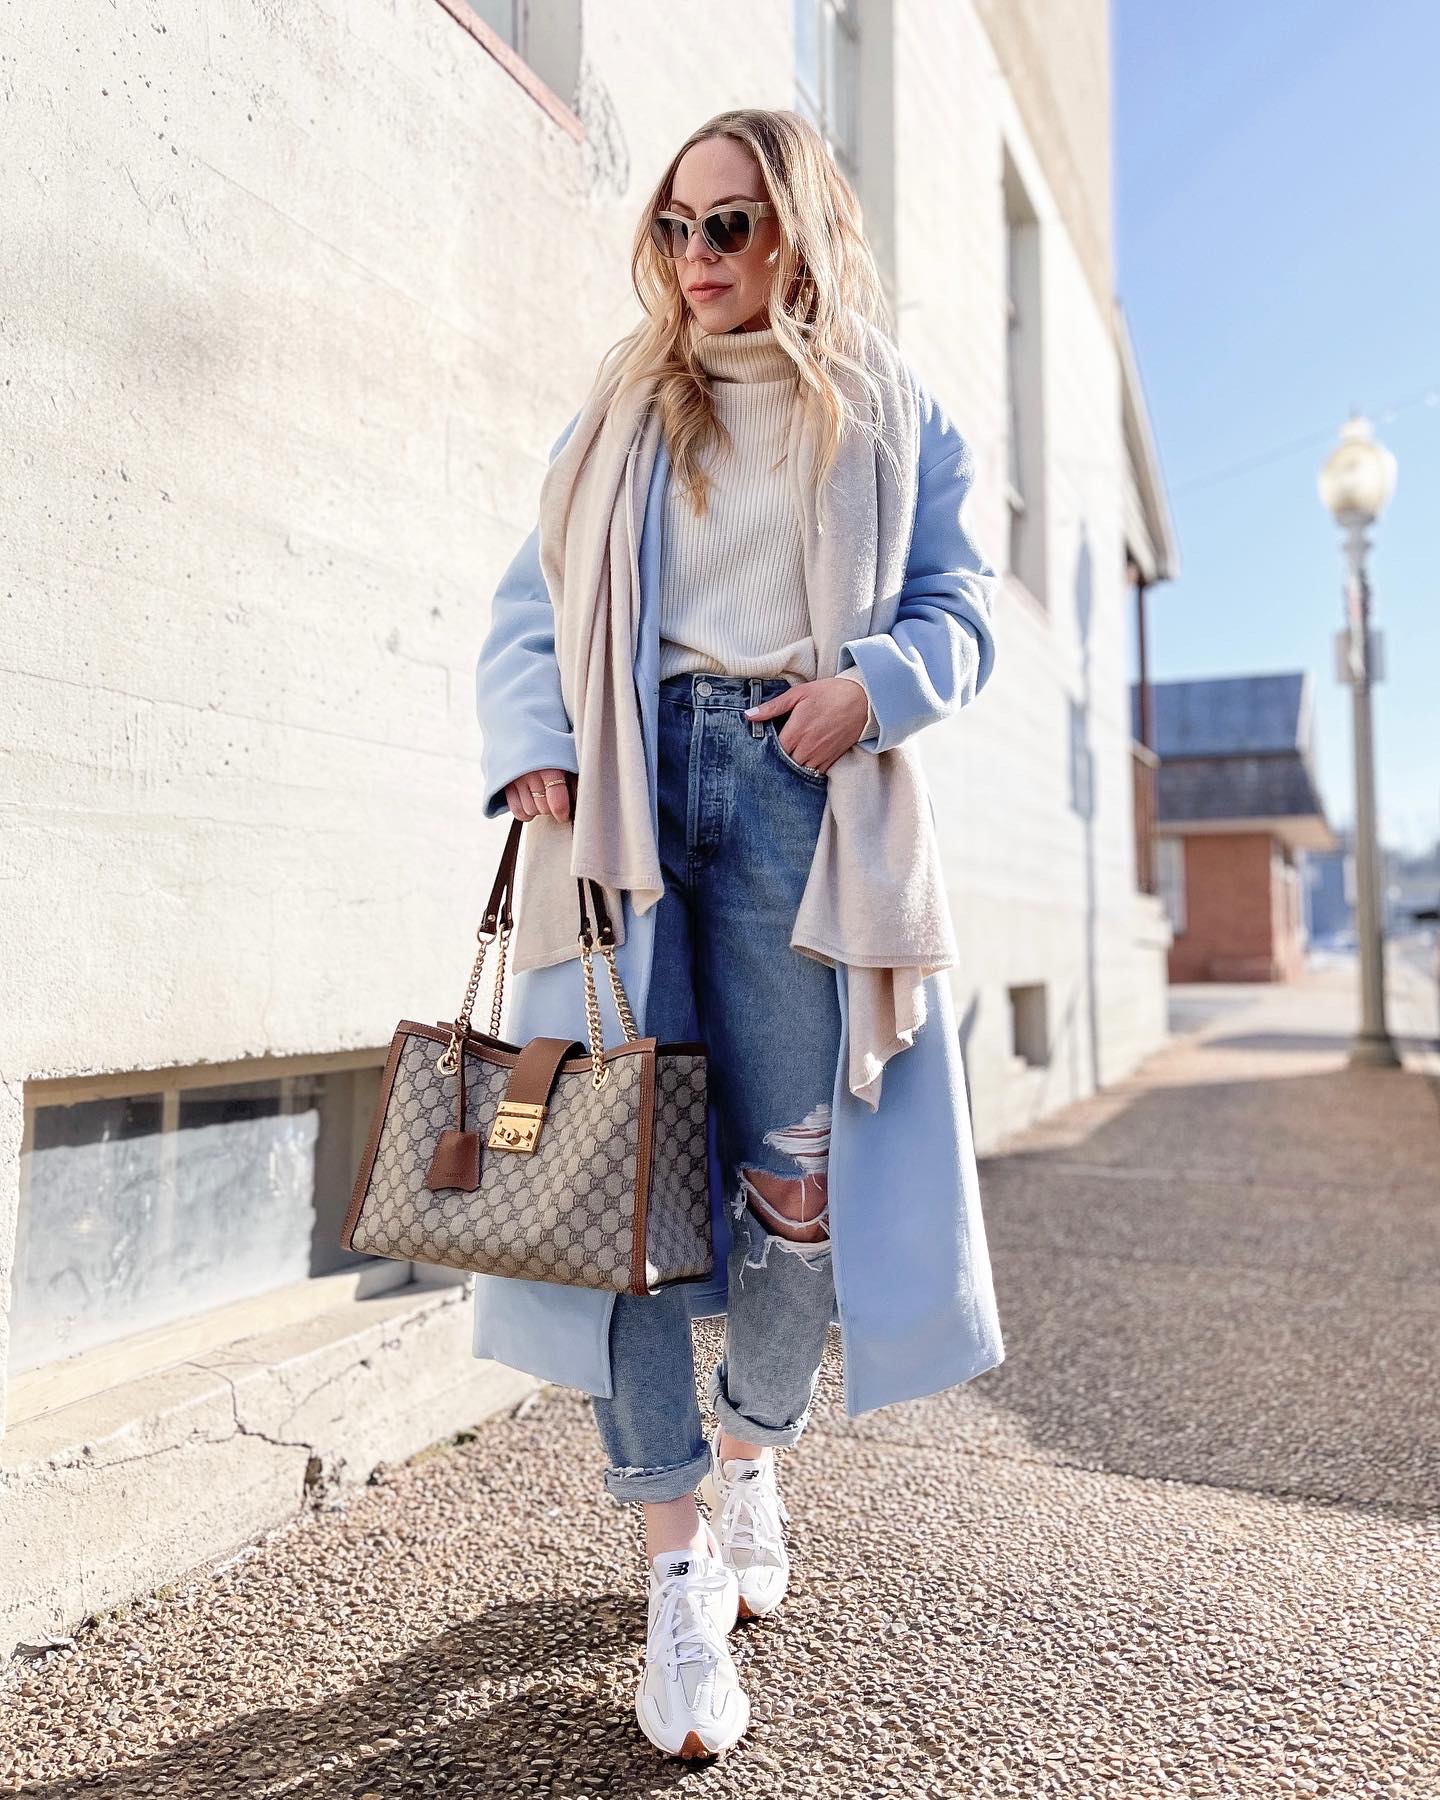 Look Chic in a Baby Blue Coat and a Clutch